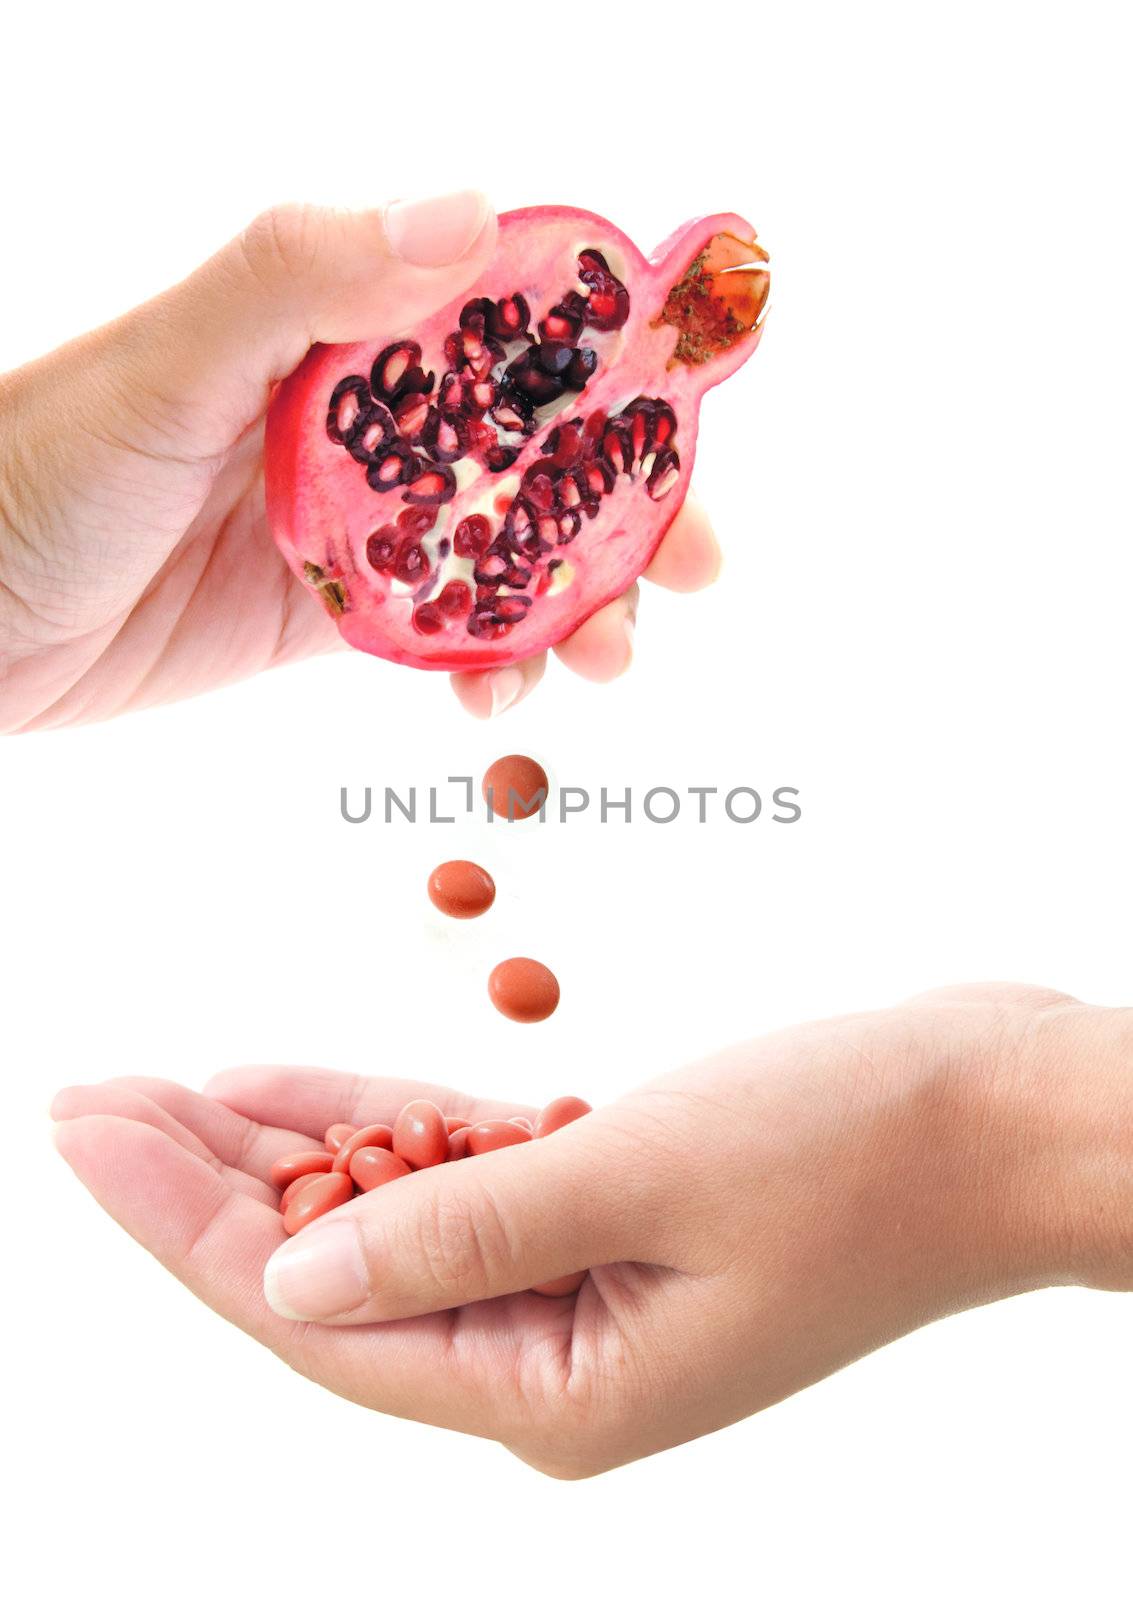 Conceptual image of vitamin tablets being squeezed out of a pomegranate fruit, a powerful antioxidant 